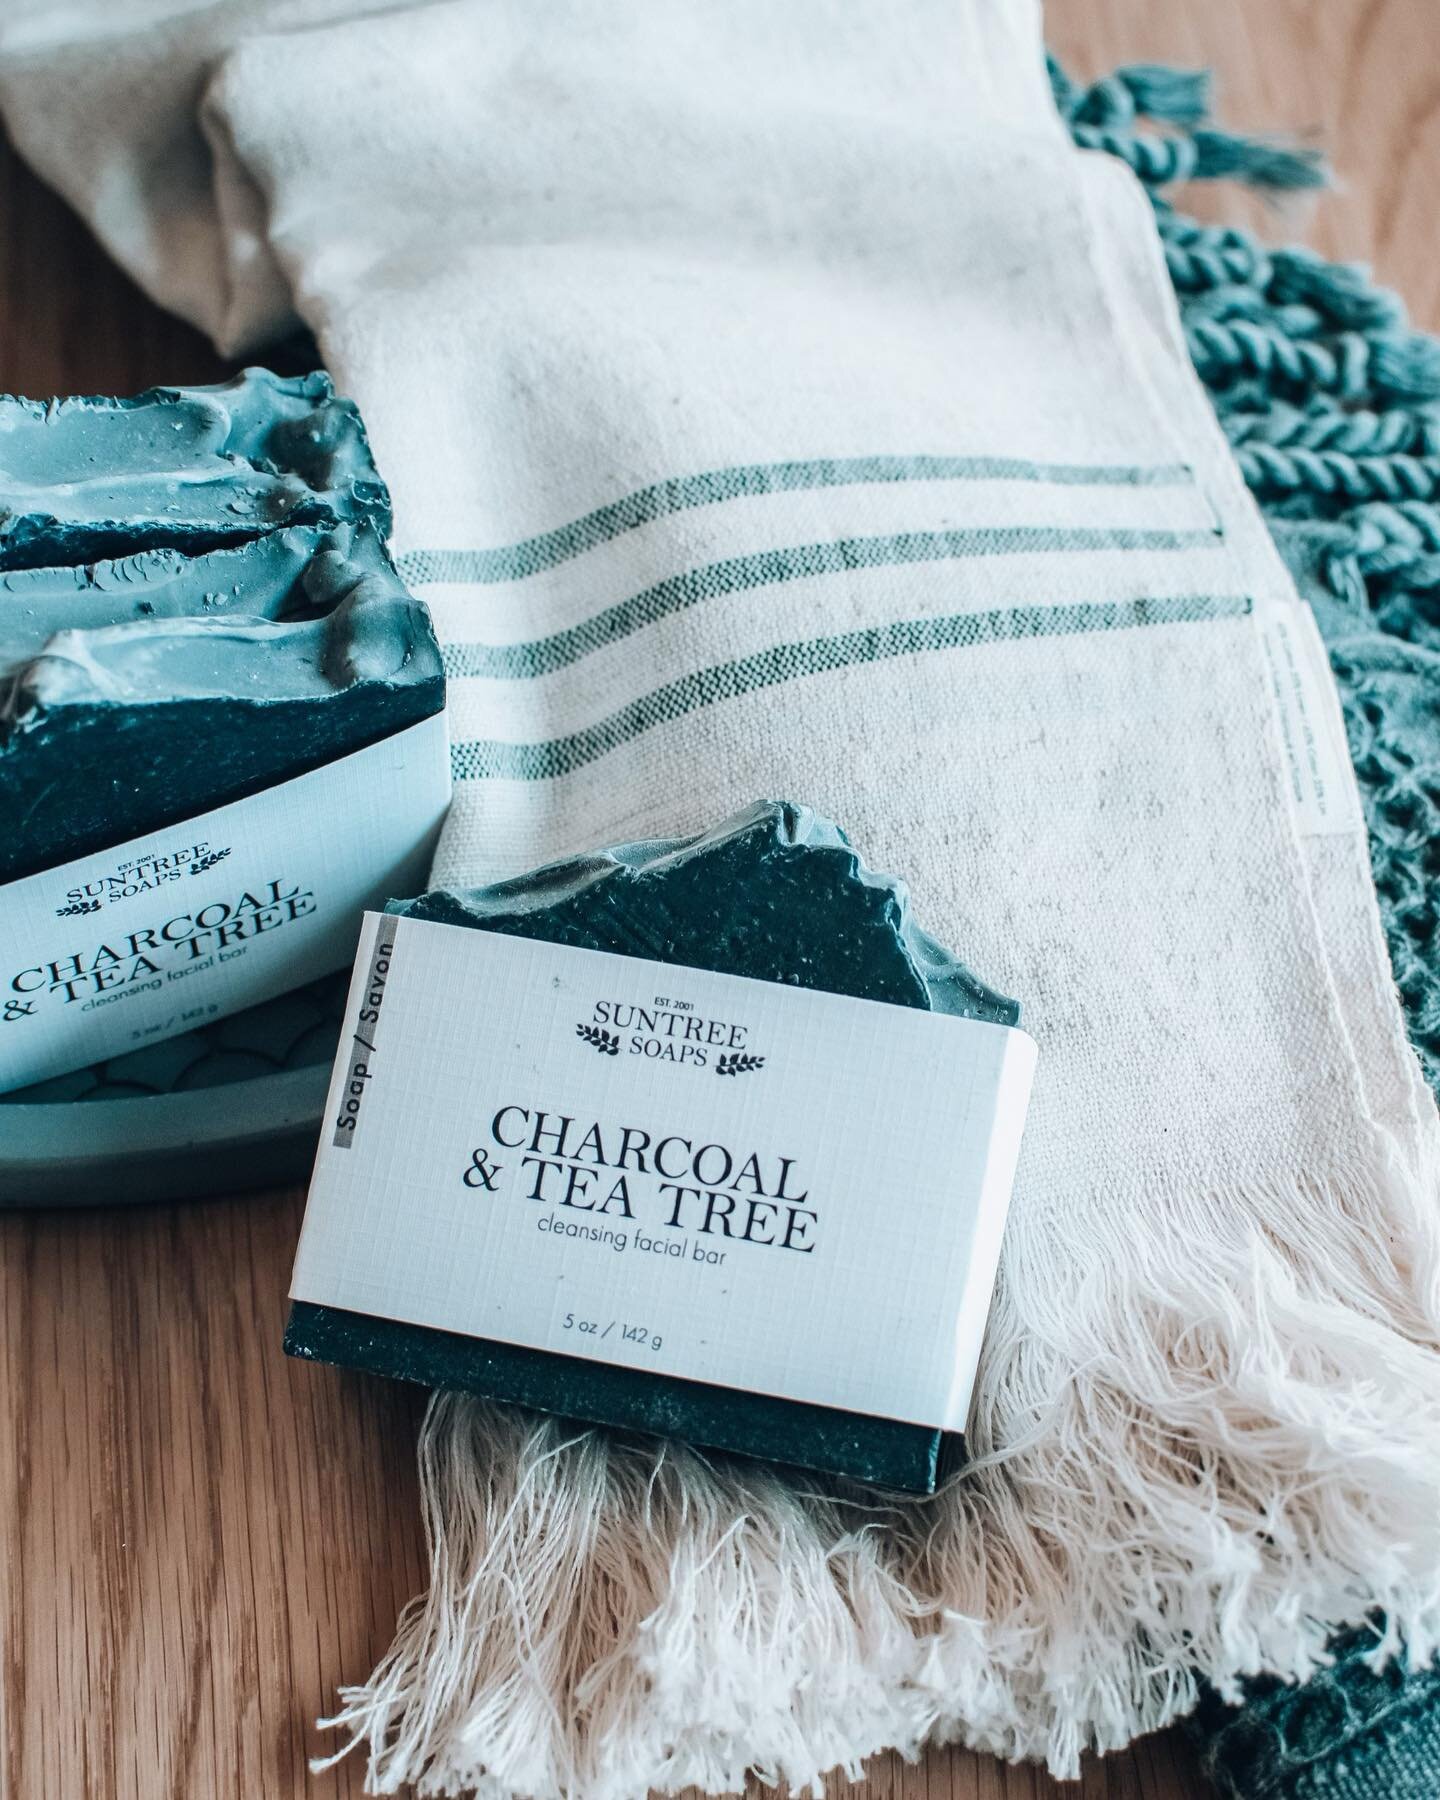 Suntree Soaps✨

Pure, natural + clean. Locally made in Okotoks, AB. These soaps smell so delicious. Available in store @vienna.mardaloop @suntreesoaps &bull;Turkish Towels by @themintandgrey 
.
.
.
.
.
#yycshopping #artisansoap #terrazzosoap #yycsmal